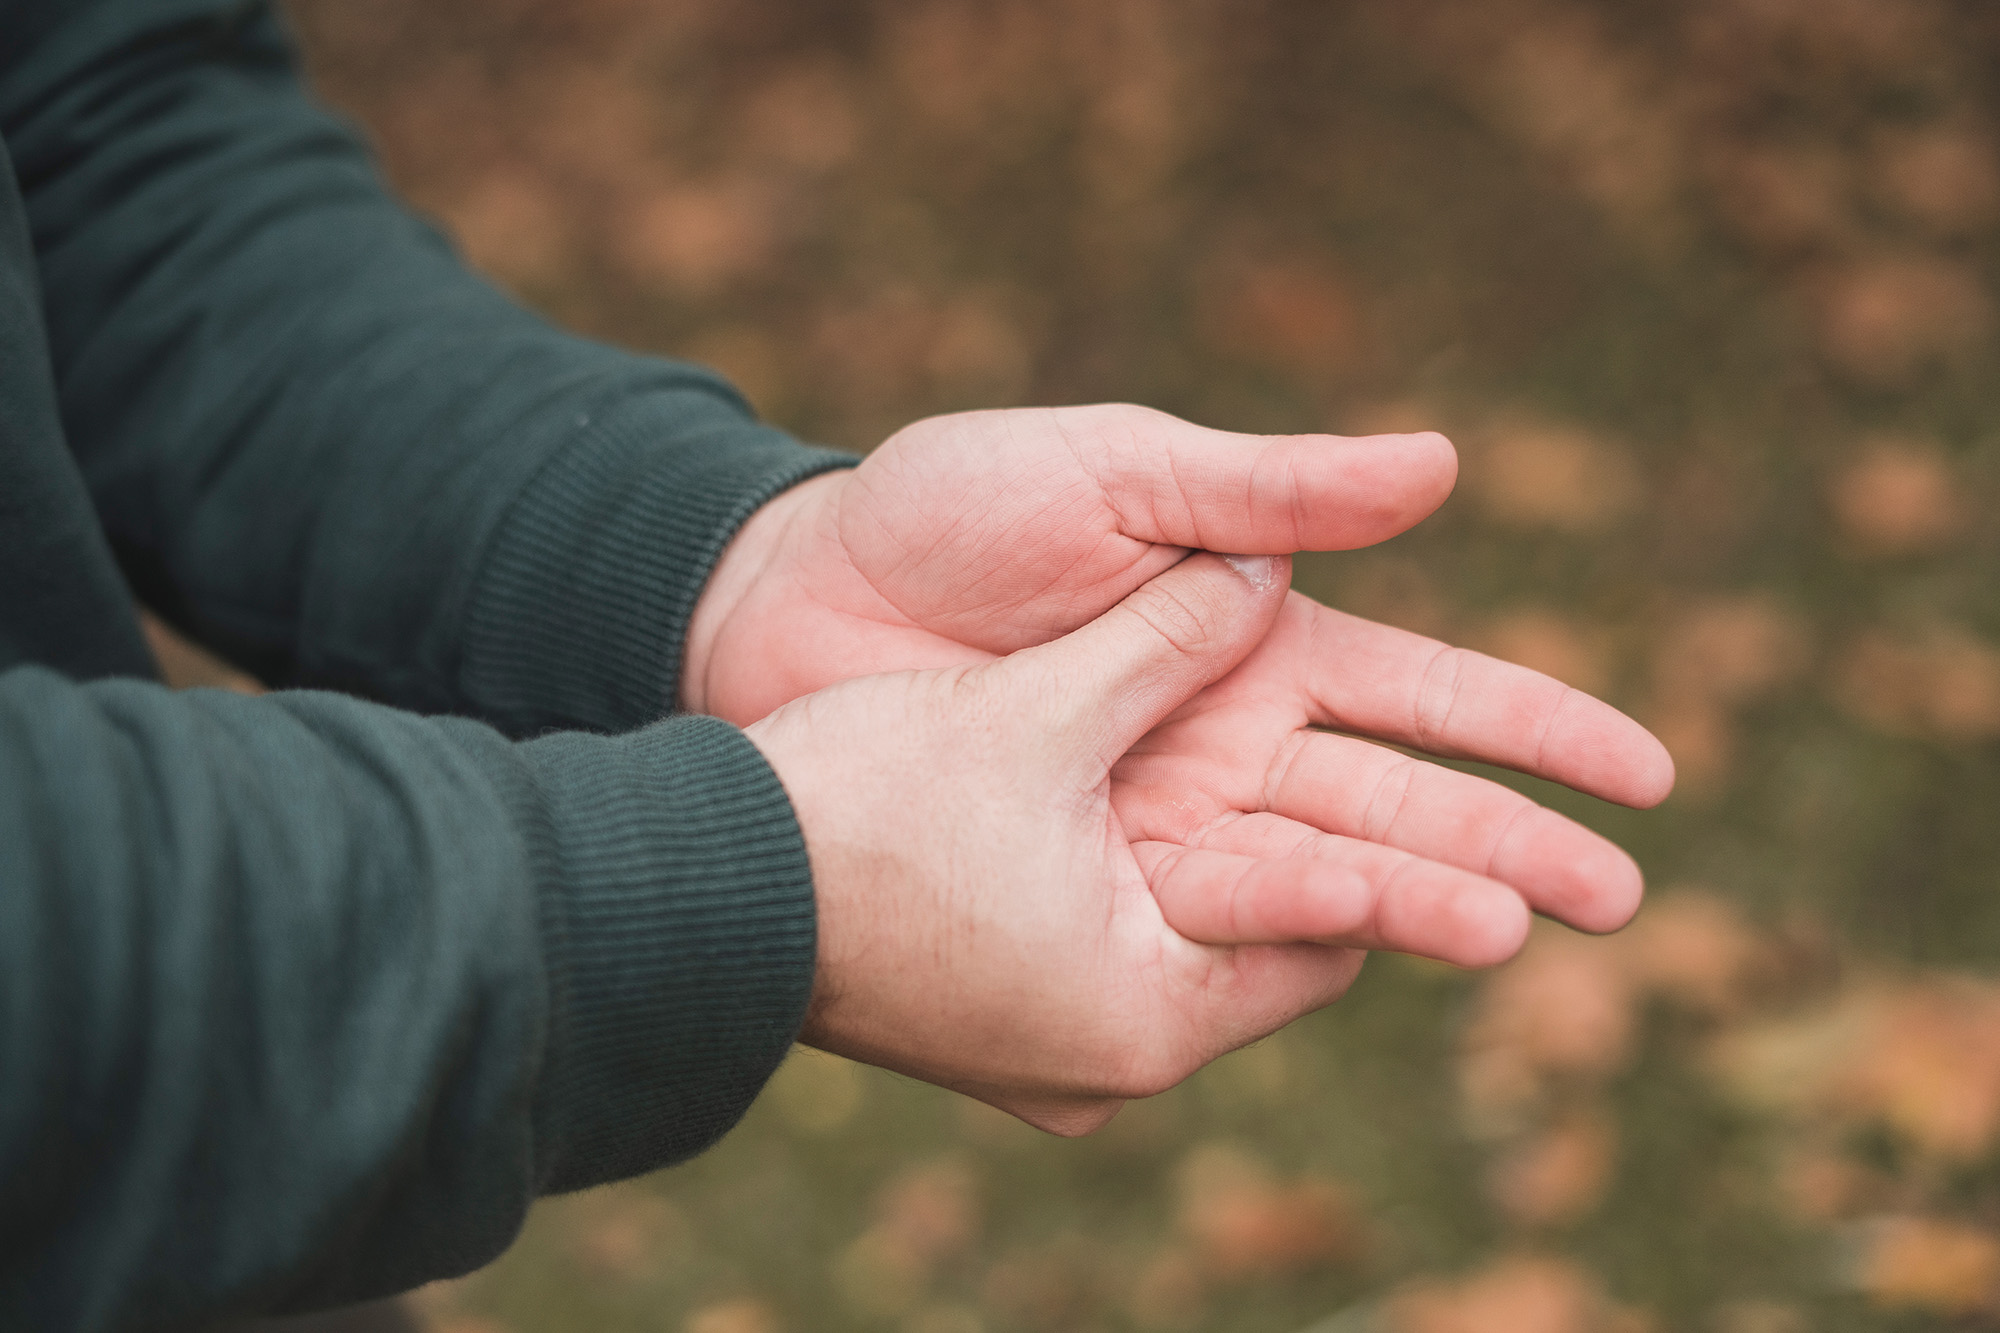 What to Know About Treatment Options for Hand Fractures